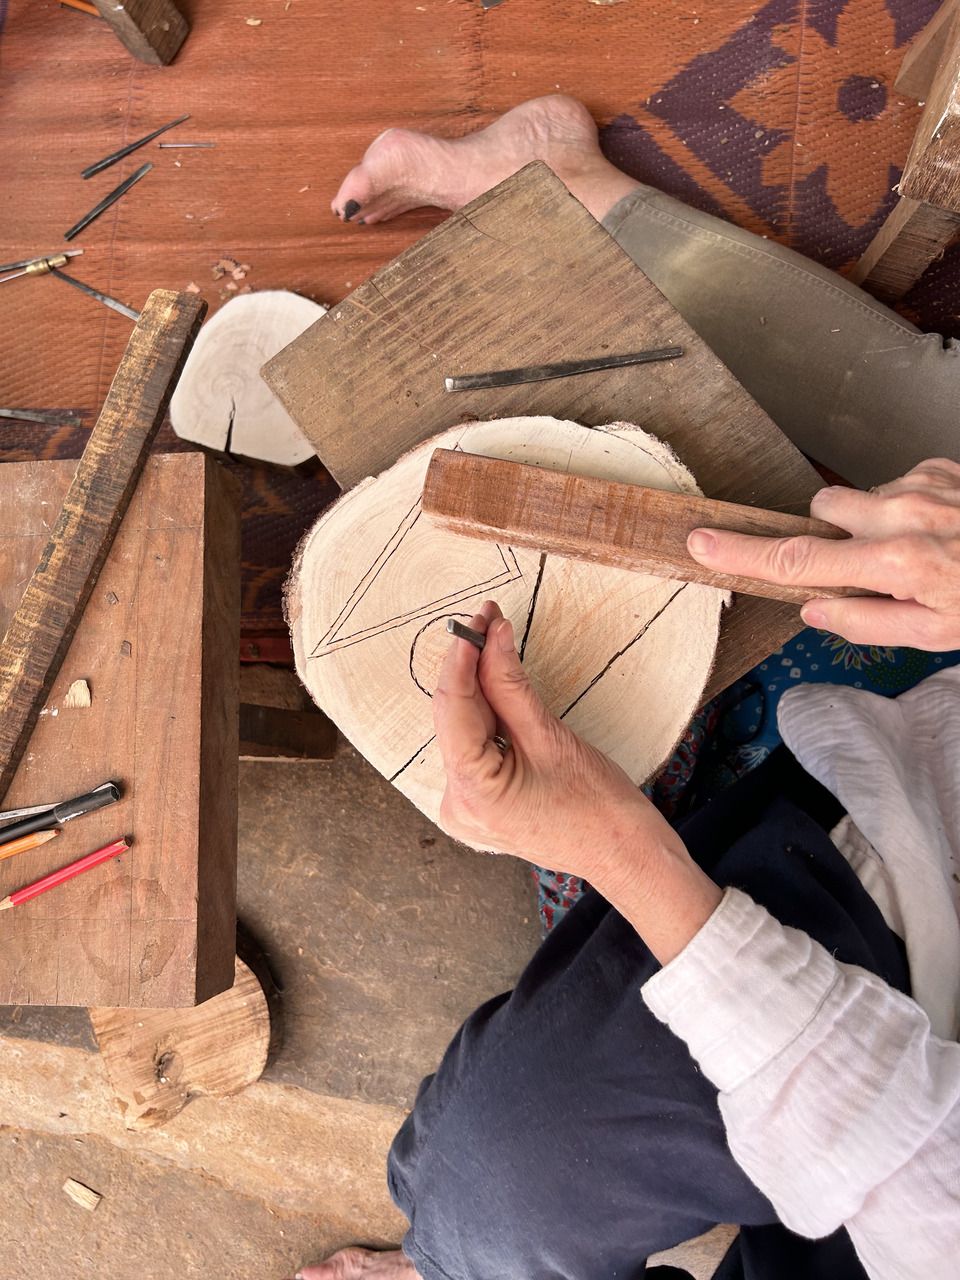 the person is using a metal tool to create or modify the piece of wood, a form of craftsmanship.